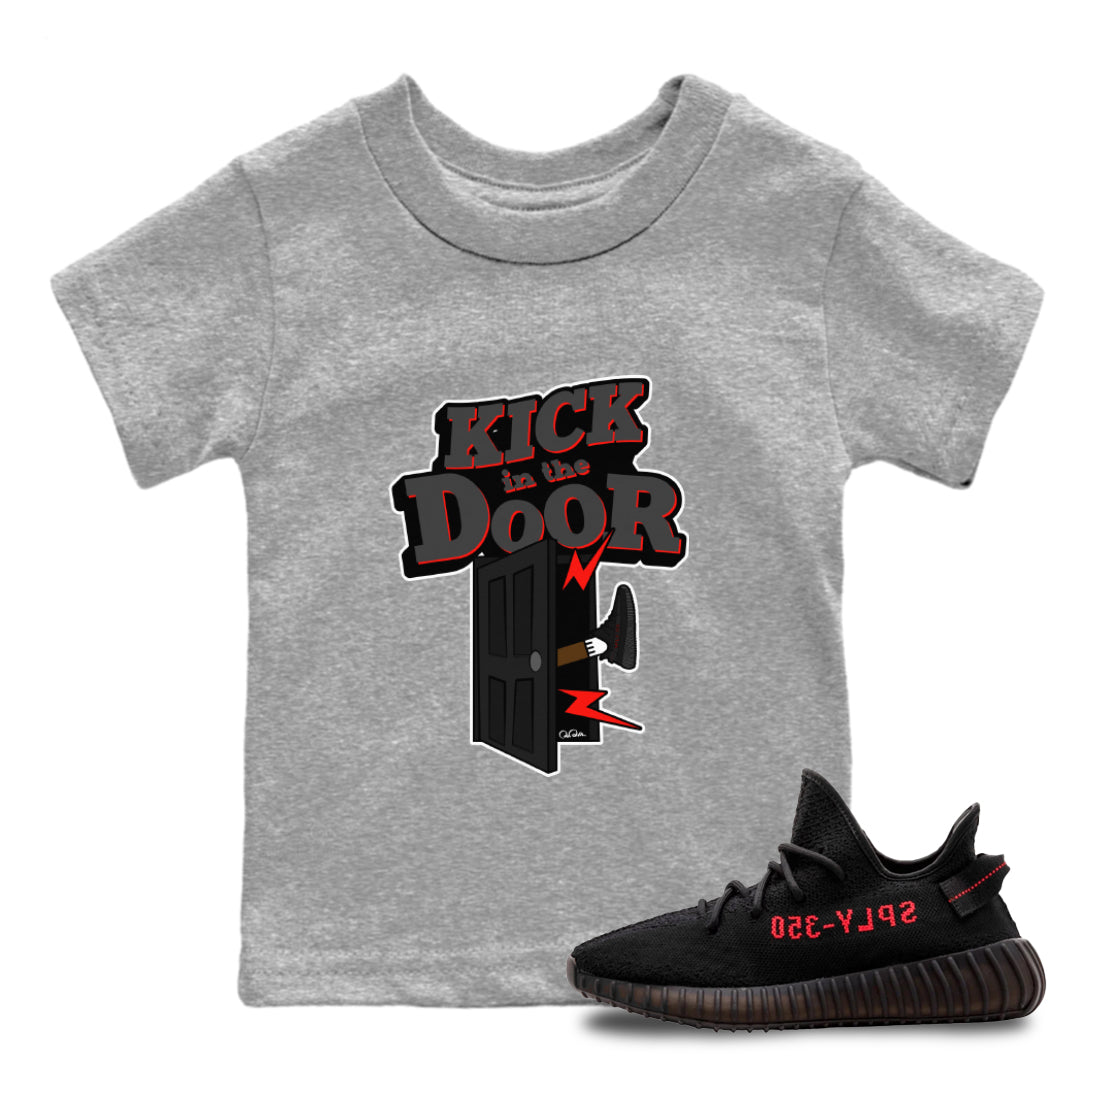 Yeezy 350 Bred shirt to match jordans Kick In The Door sneaker tees Adidas Yeezy Boost V2 350 Bred SNRT Sneaker Release Tees Baby Toddler Heather Grey 1 T-Shirt